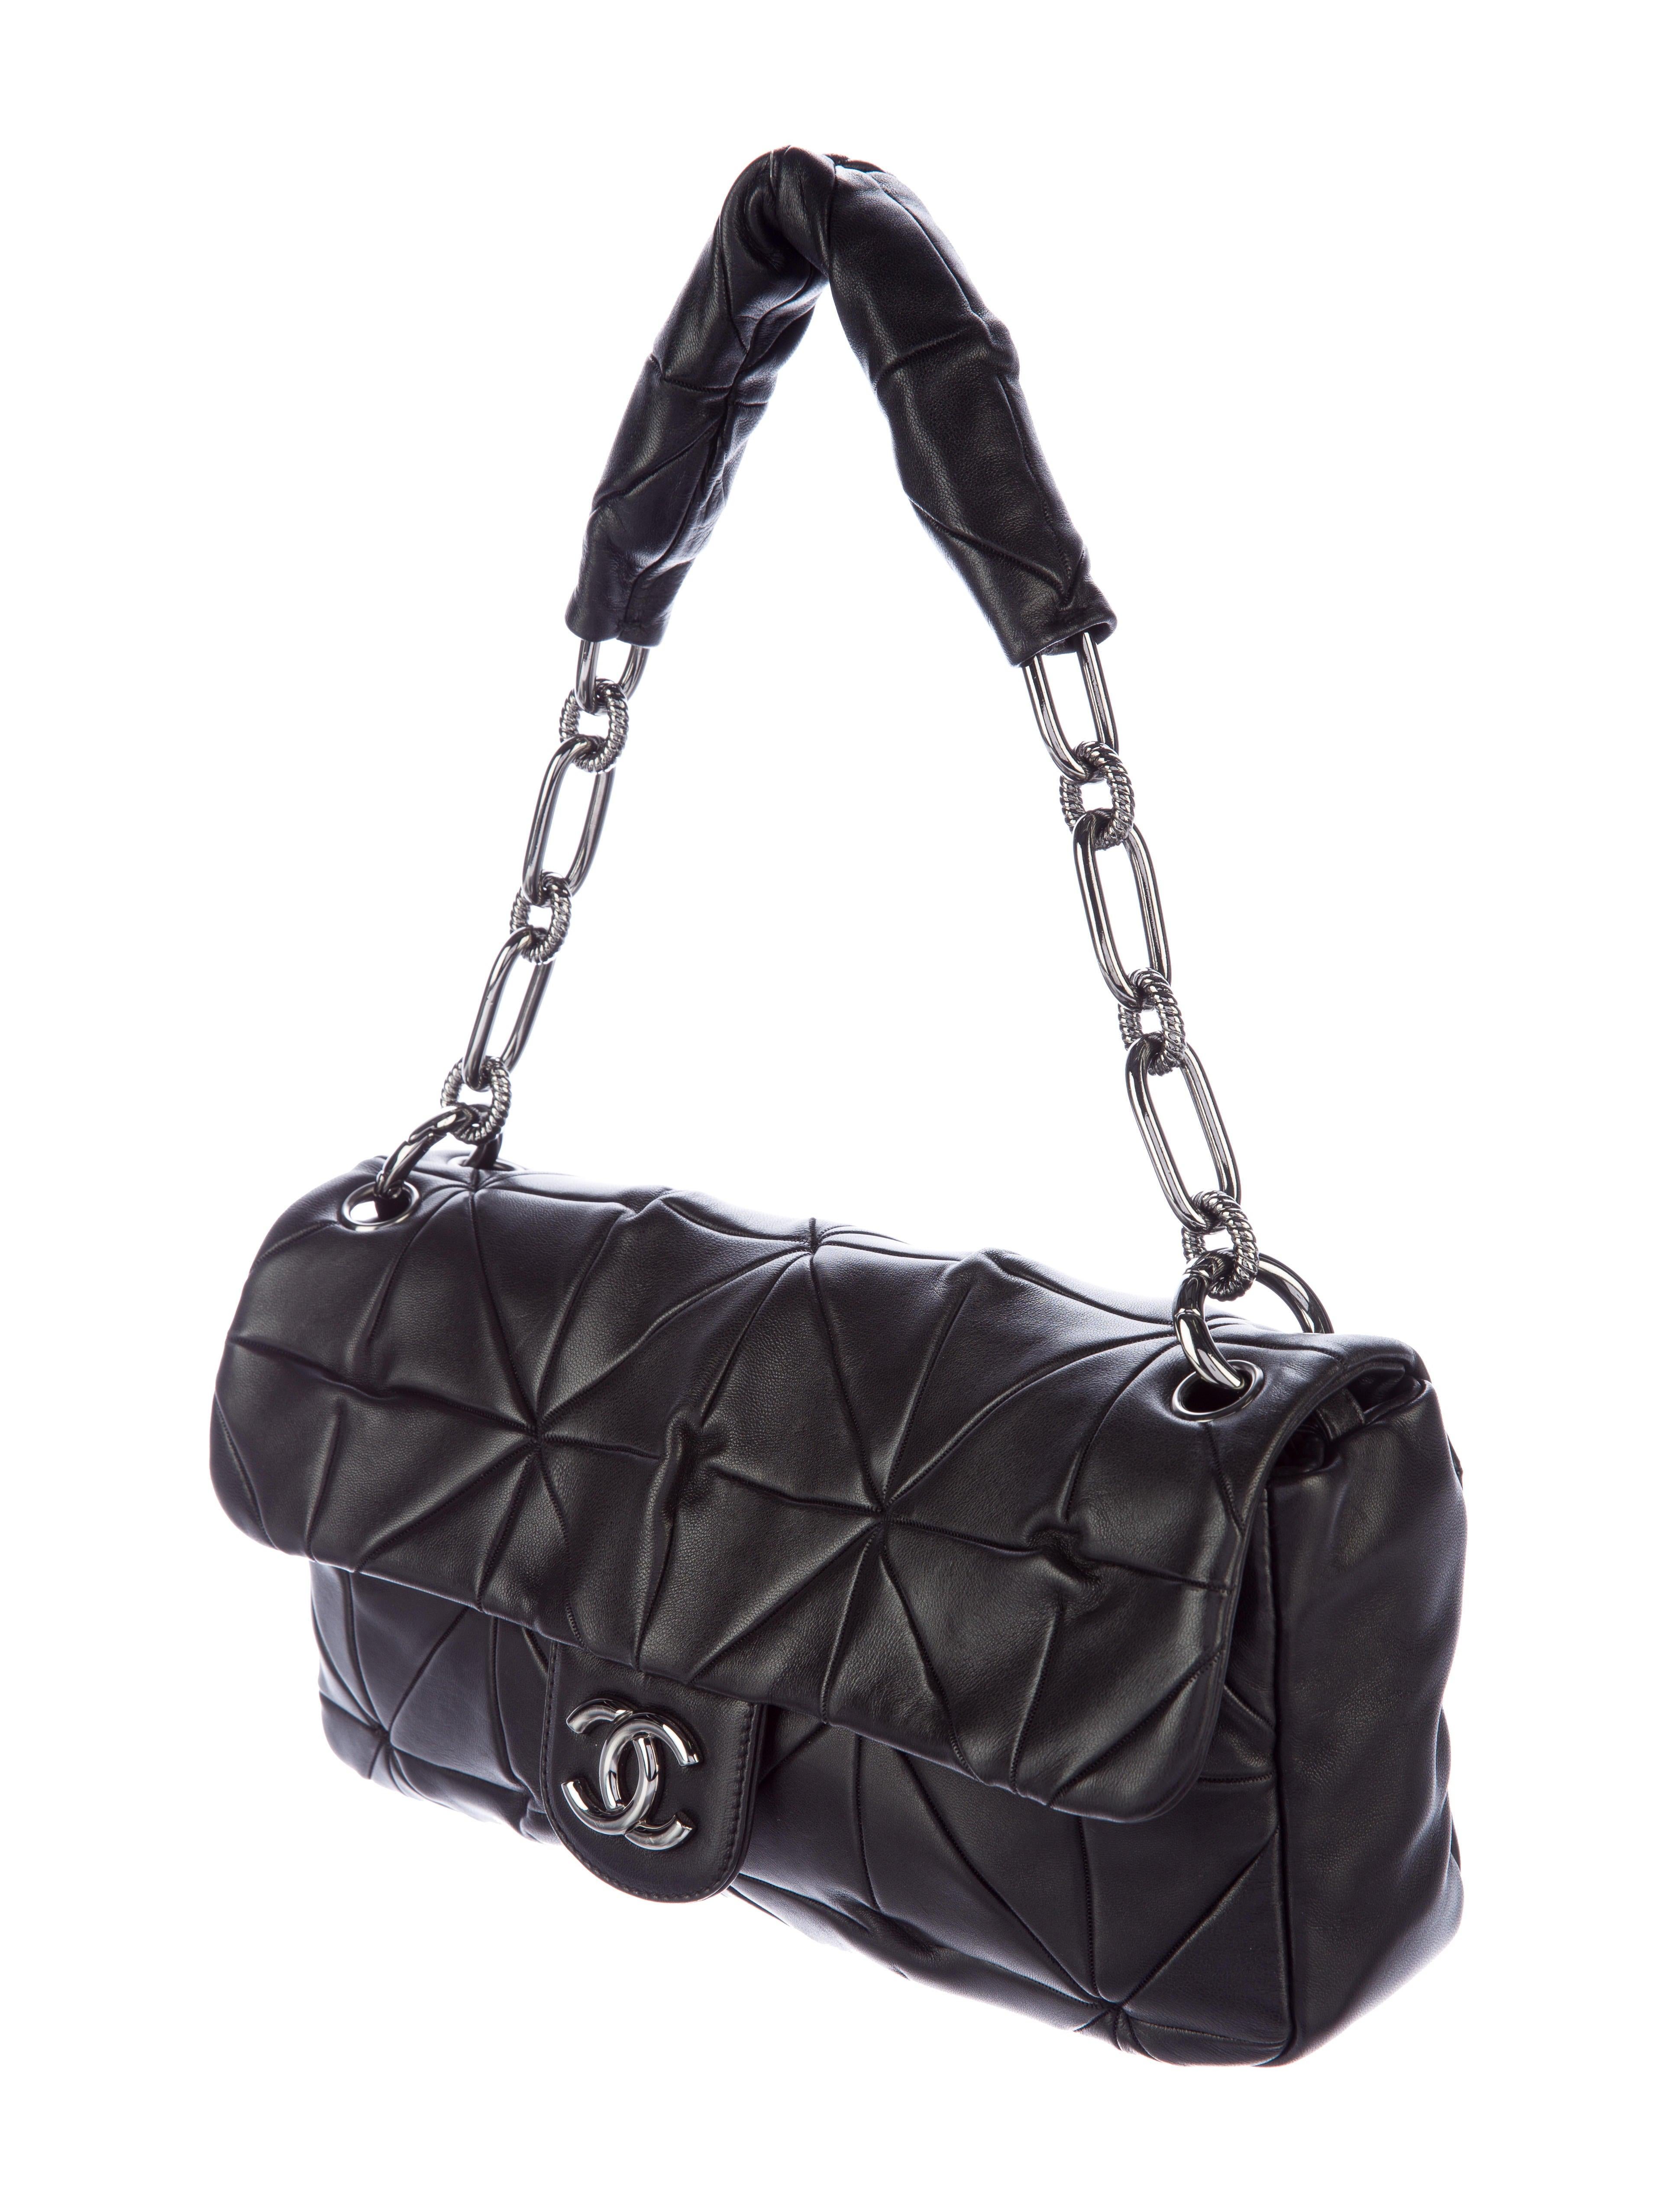 Chanel Jumbo Maxi Soft Lambskin Leather Classic Flap Shoulder Bag

Year: 2008-2009

Gunmetal hardware
Black quilted lambskin leather 
Logo at front with magnetic snap flap closure
Single chain-link and leather shoulder strap
Grey striped woven